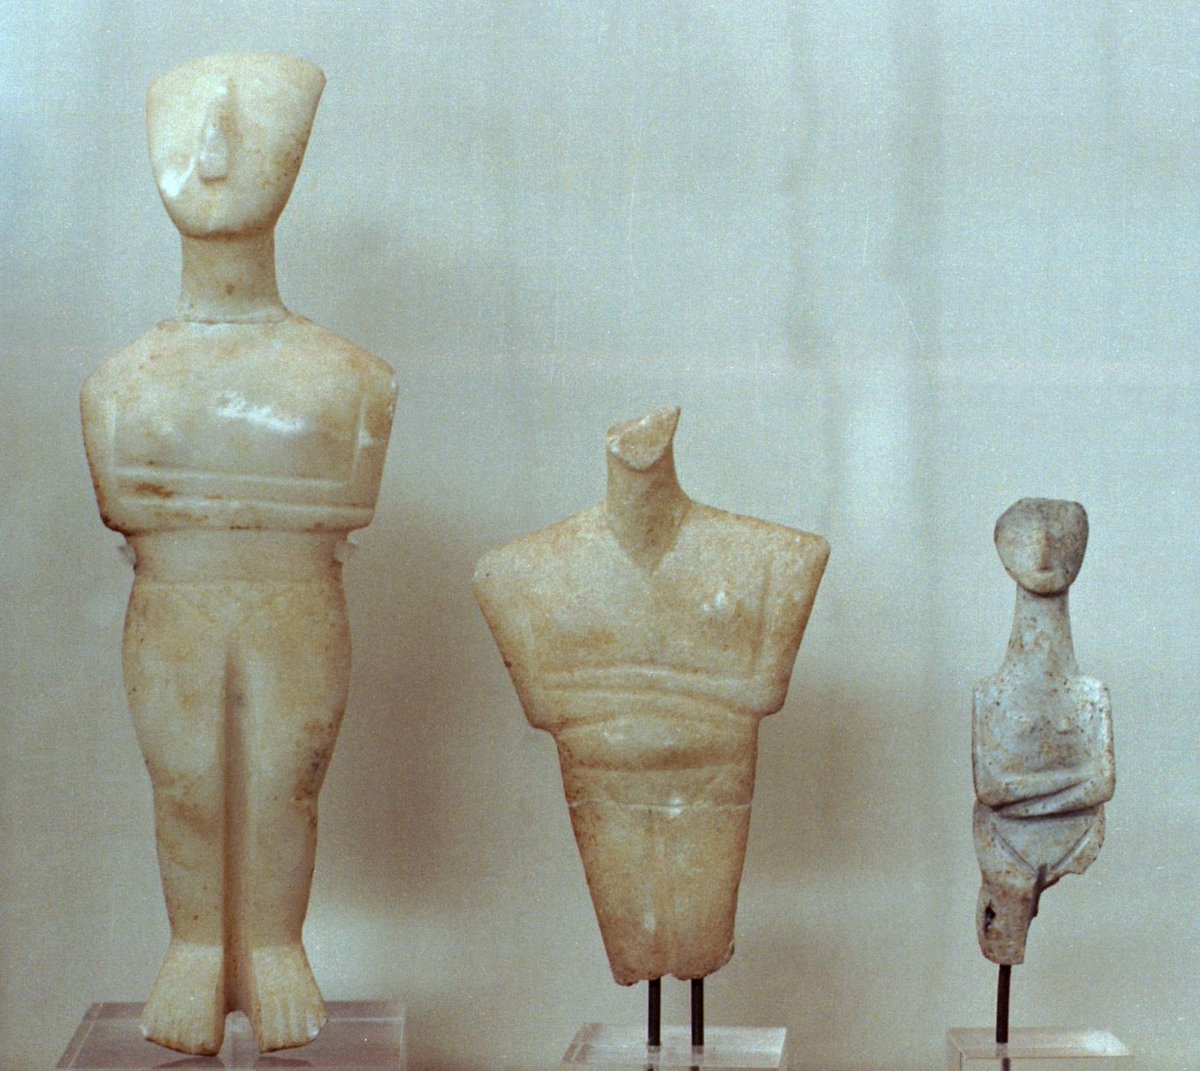 Cycladic type figurines dating to the 3rd millennium BC. 
Two are from the site of Pheia, one of Nereis, both in region Elis on the Peloponnese. 
Archaeological Museum of Olympia.
💥The influence of the Cycladic culture in the faraway Helladic areas is amazing.💥